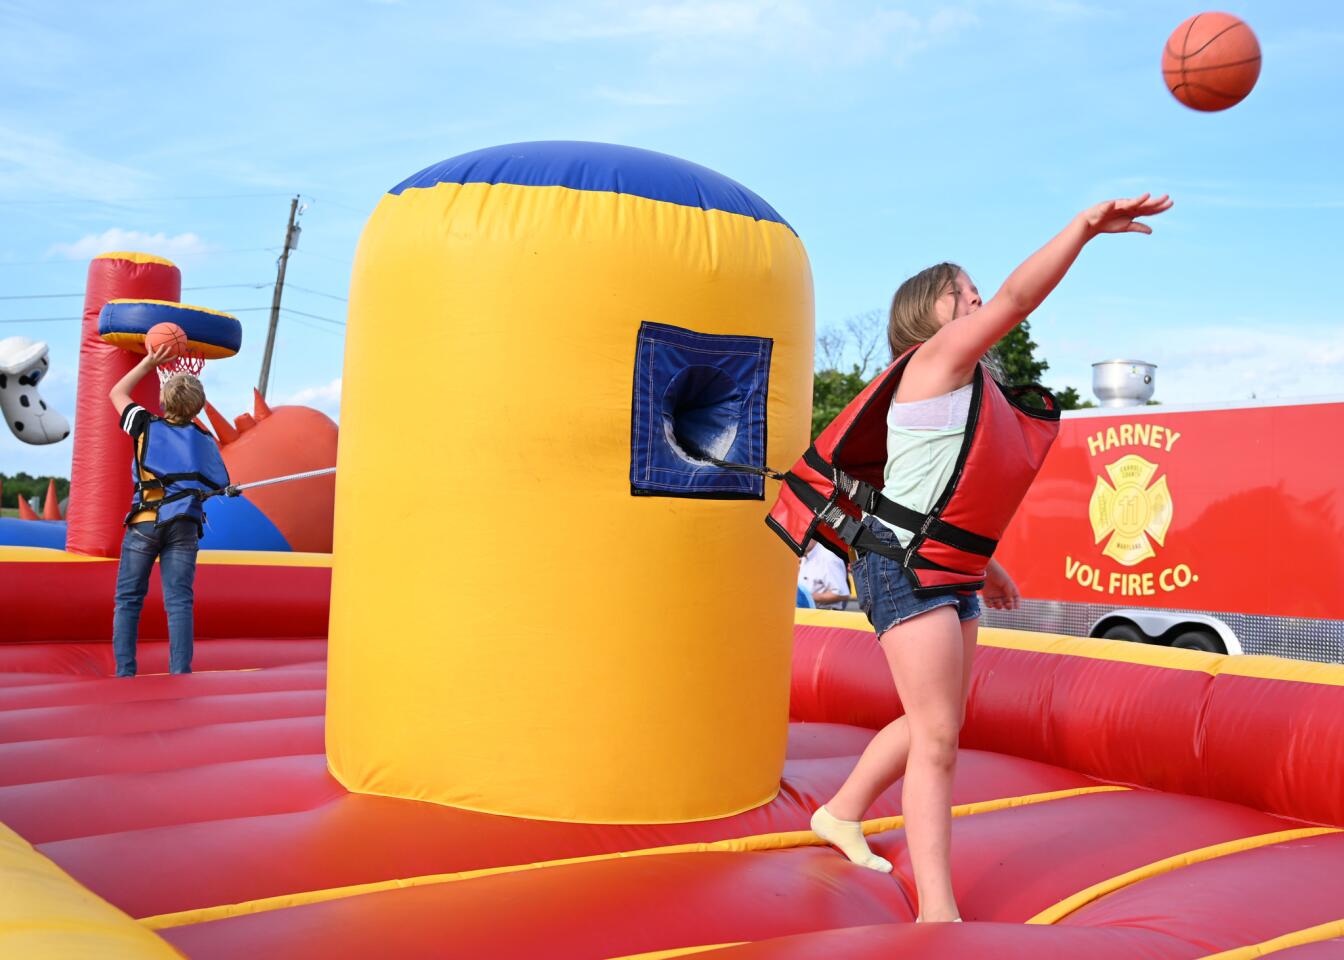 Jaden Reed, right, and her cousin Braydon Kelbaugh, both of Fairfield, Pa., play a game of basketball while tethered by a bungee cord during the carnival at the Harney Volunteer Fire Company on Tuesday, June 25.